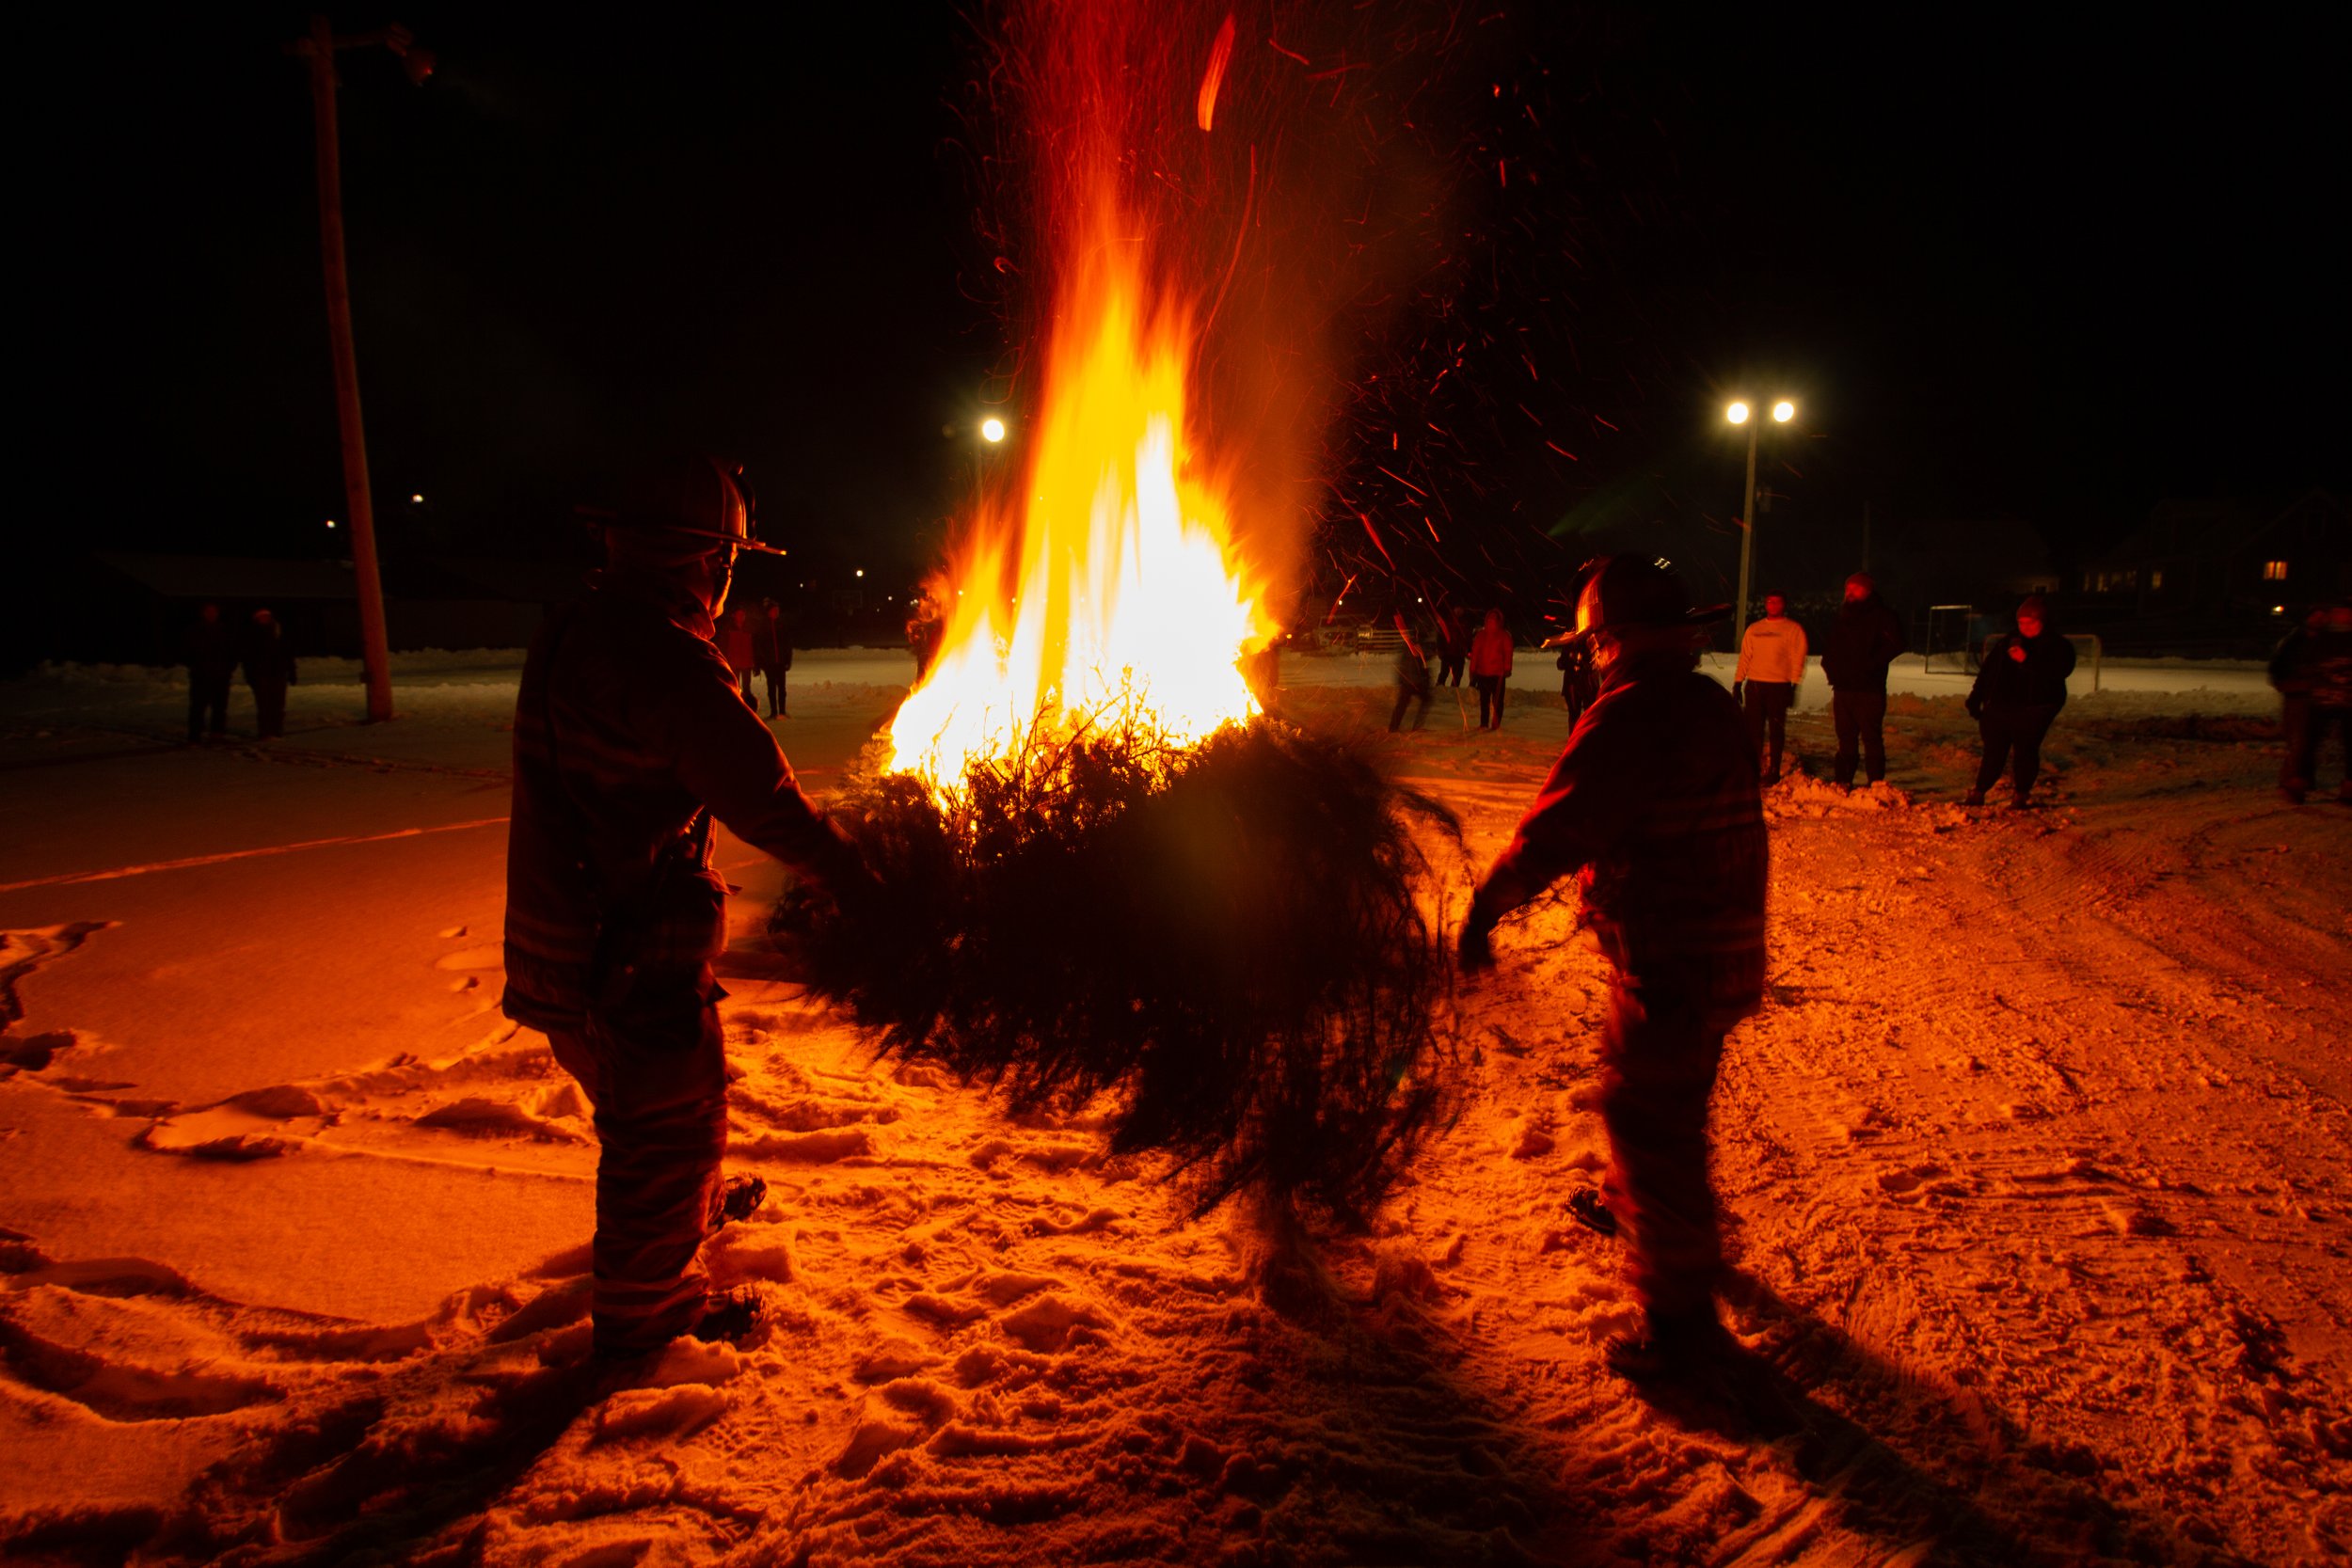  The Christmas tree bonfire is a tradition in Waterbury. Photo by Tyler Keefe 